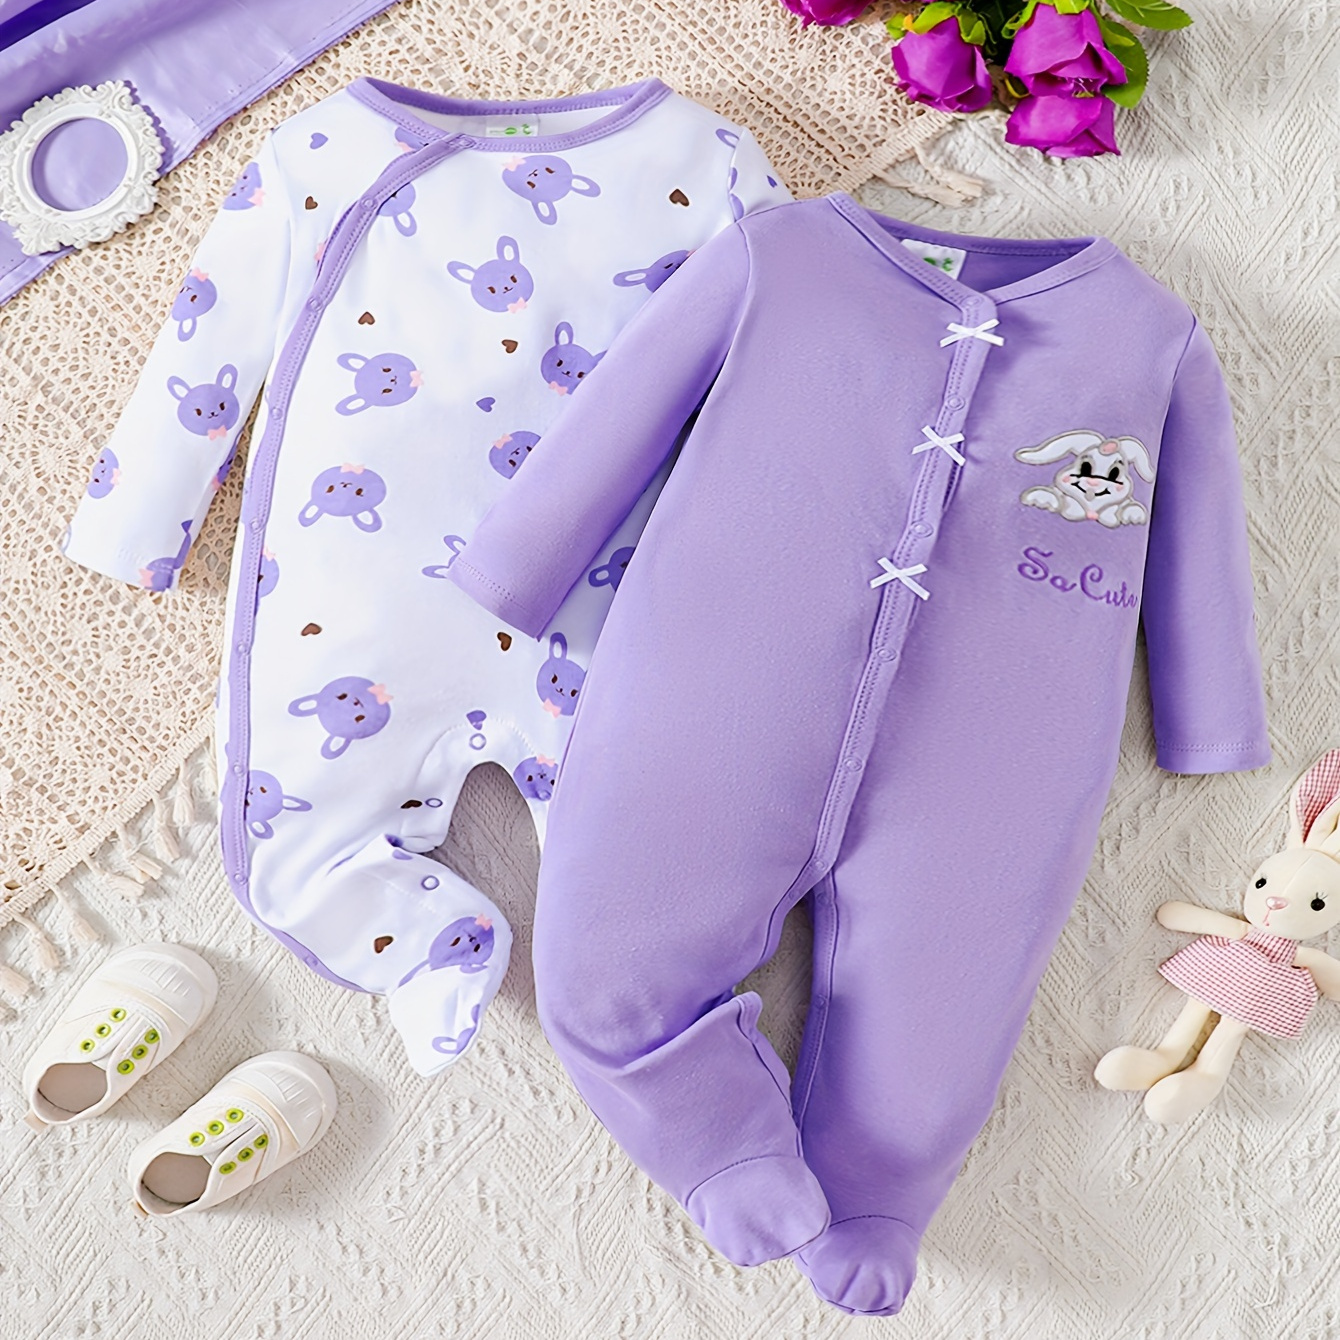 

Baby Cute Bunny Graphic & Comfy Cotton Jumpsuits 2pcs/set For Boys And Girls, Footed Onesies, Toddler's Cute Pajamas Set